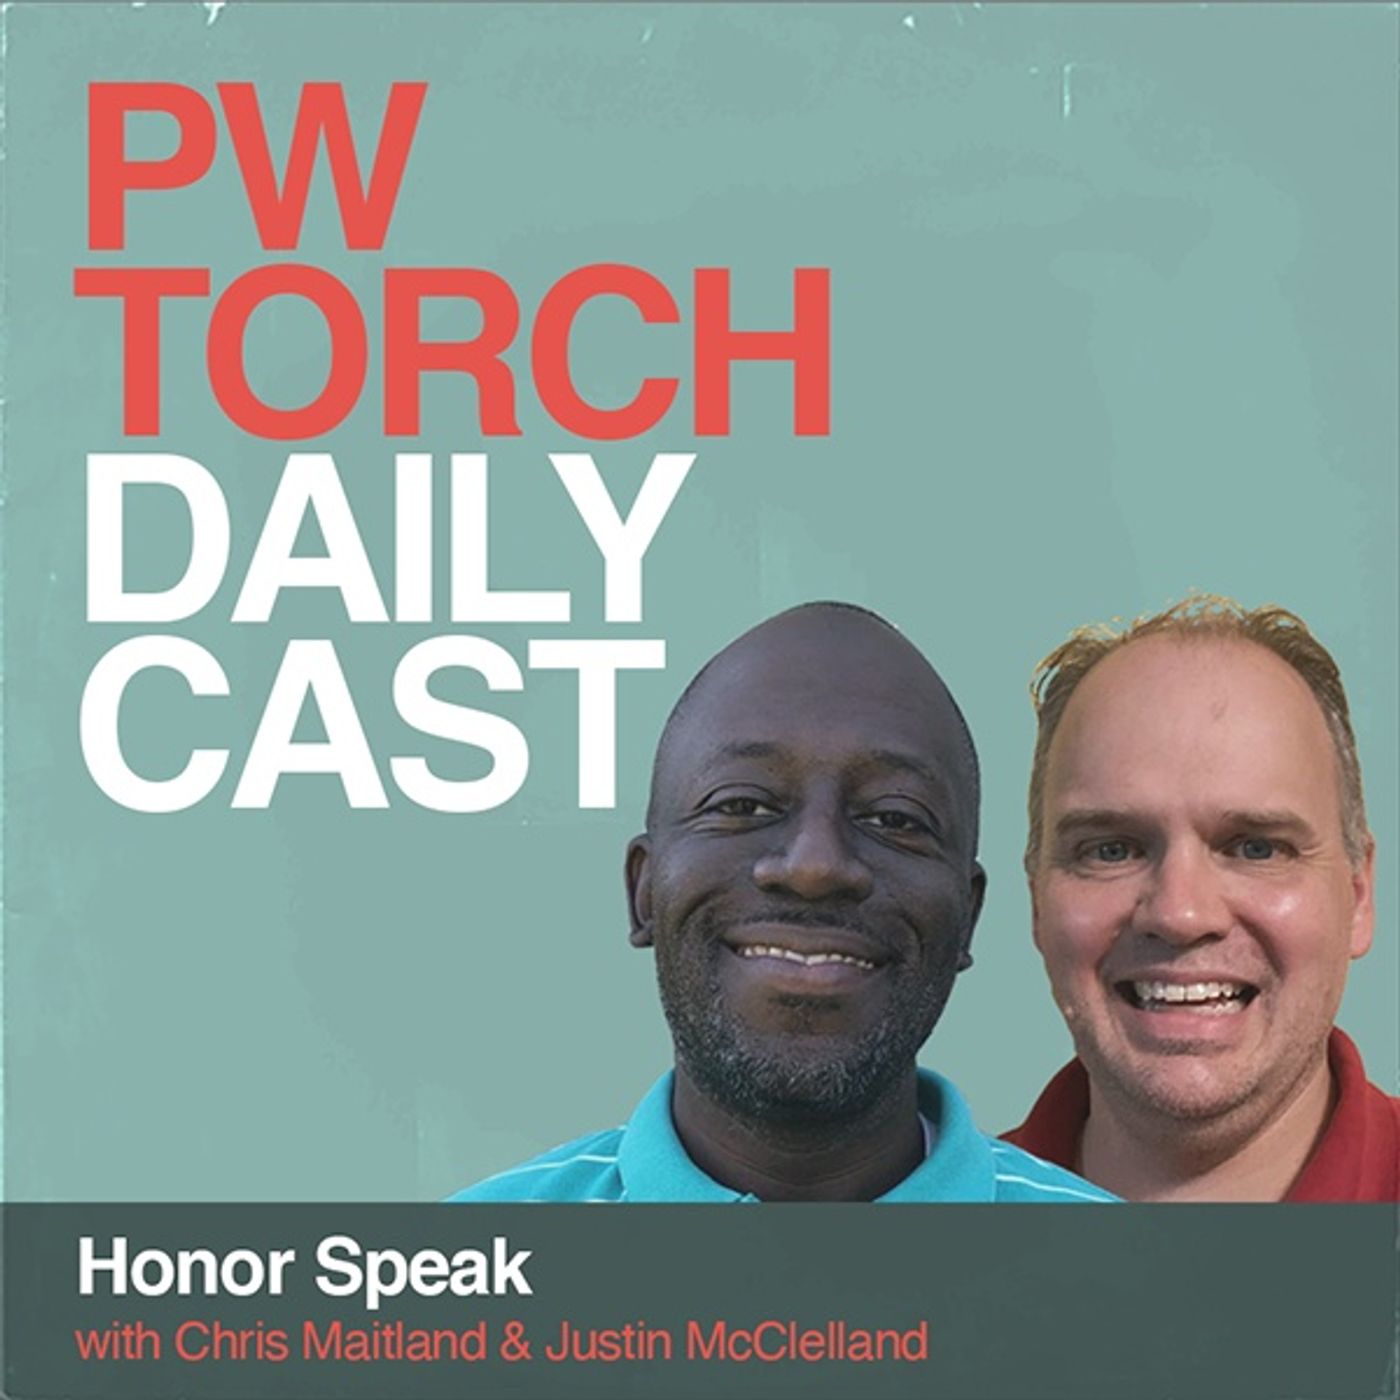 PWTorch Dailycast - Honor Speak - Maitland & McClelland talk ROH announcing location of Final Battle, the Briscoes appearing in GCW, more